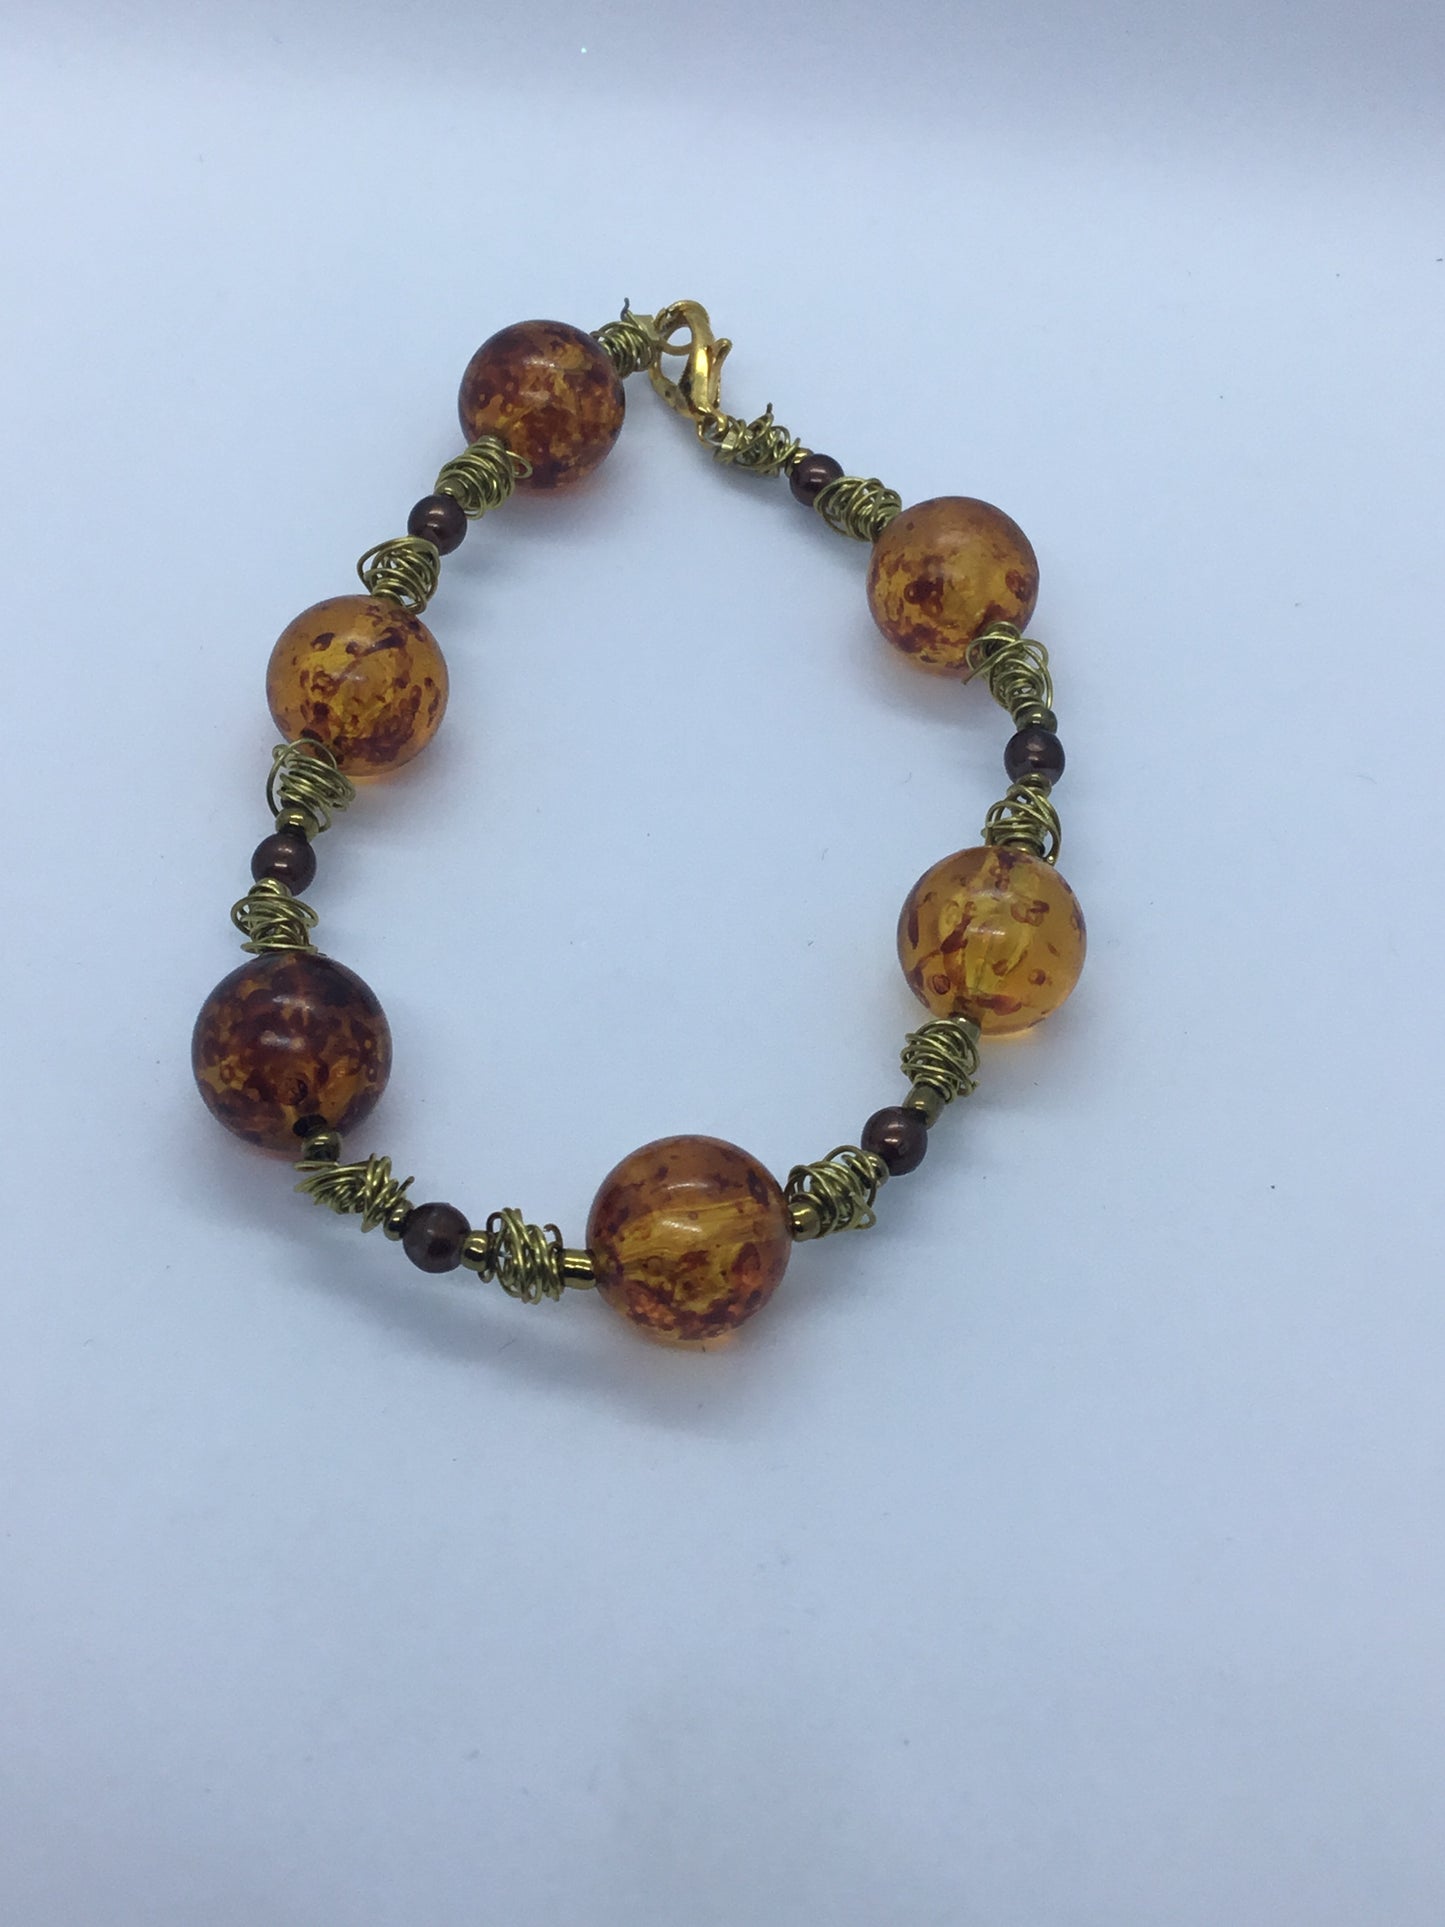 Gold wire and brown bead bracelet (20cm).